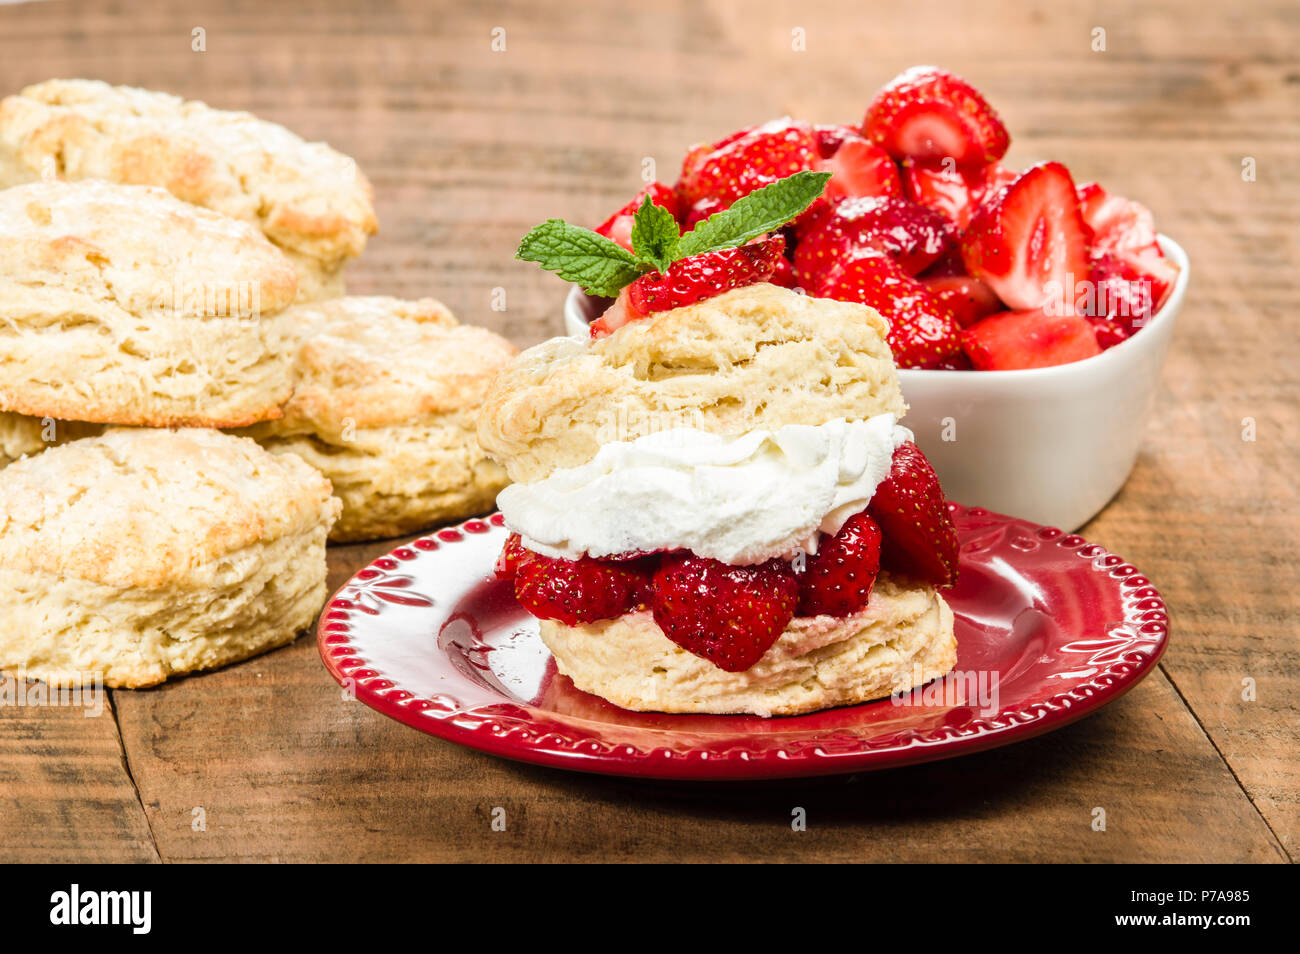 Red plate with strawberry biscuit dessert Stock Photo